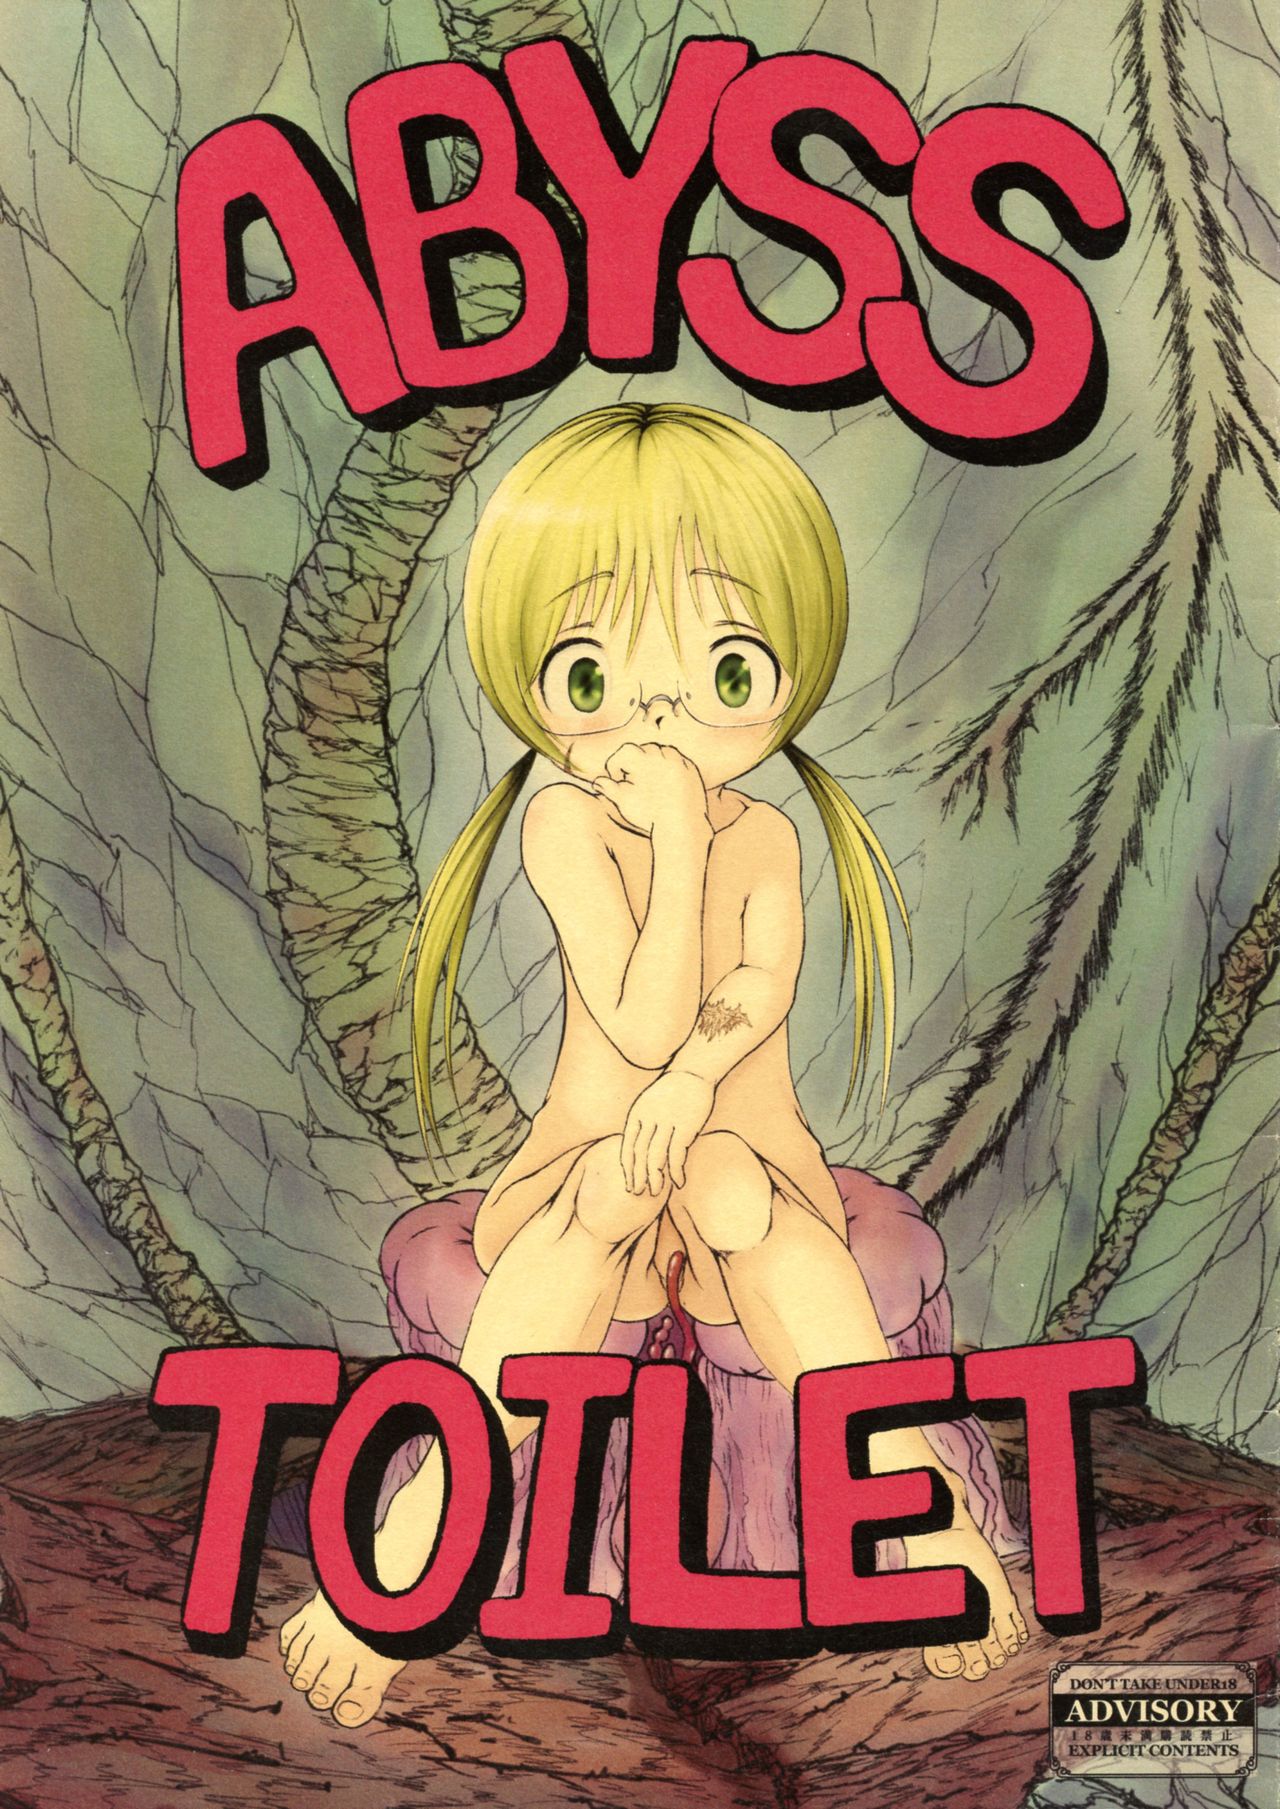 (C94) [Doujyo Kurabu (SAPPHIRE)] ABYSS TOILET (Made in Abyss) page 1 full